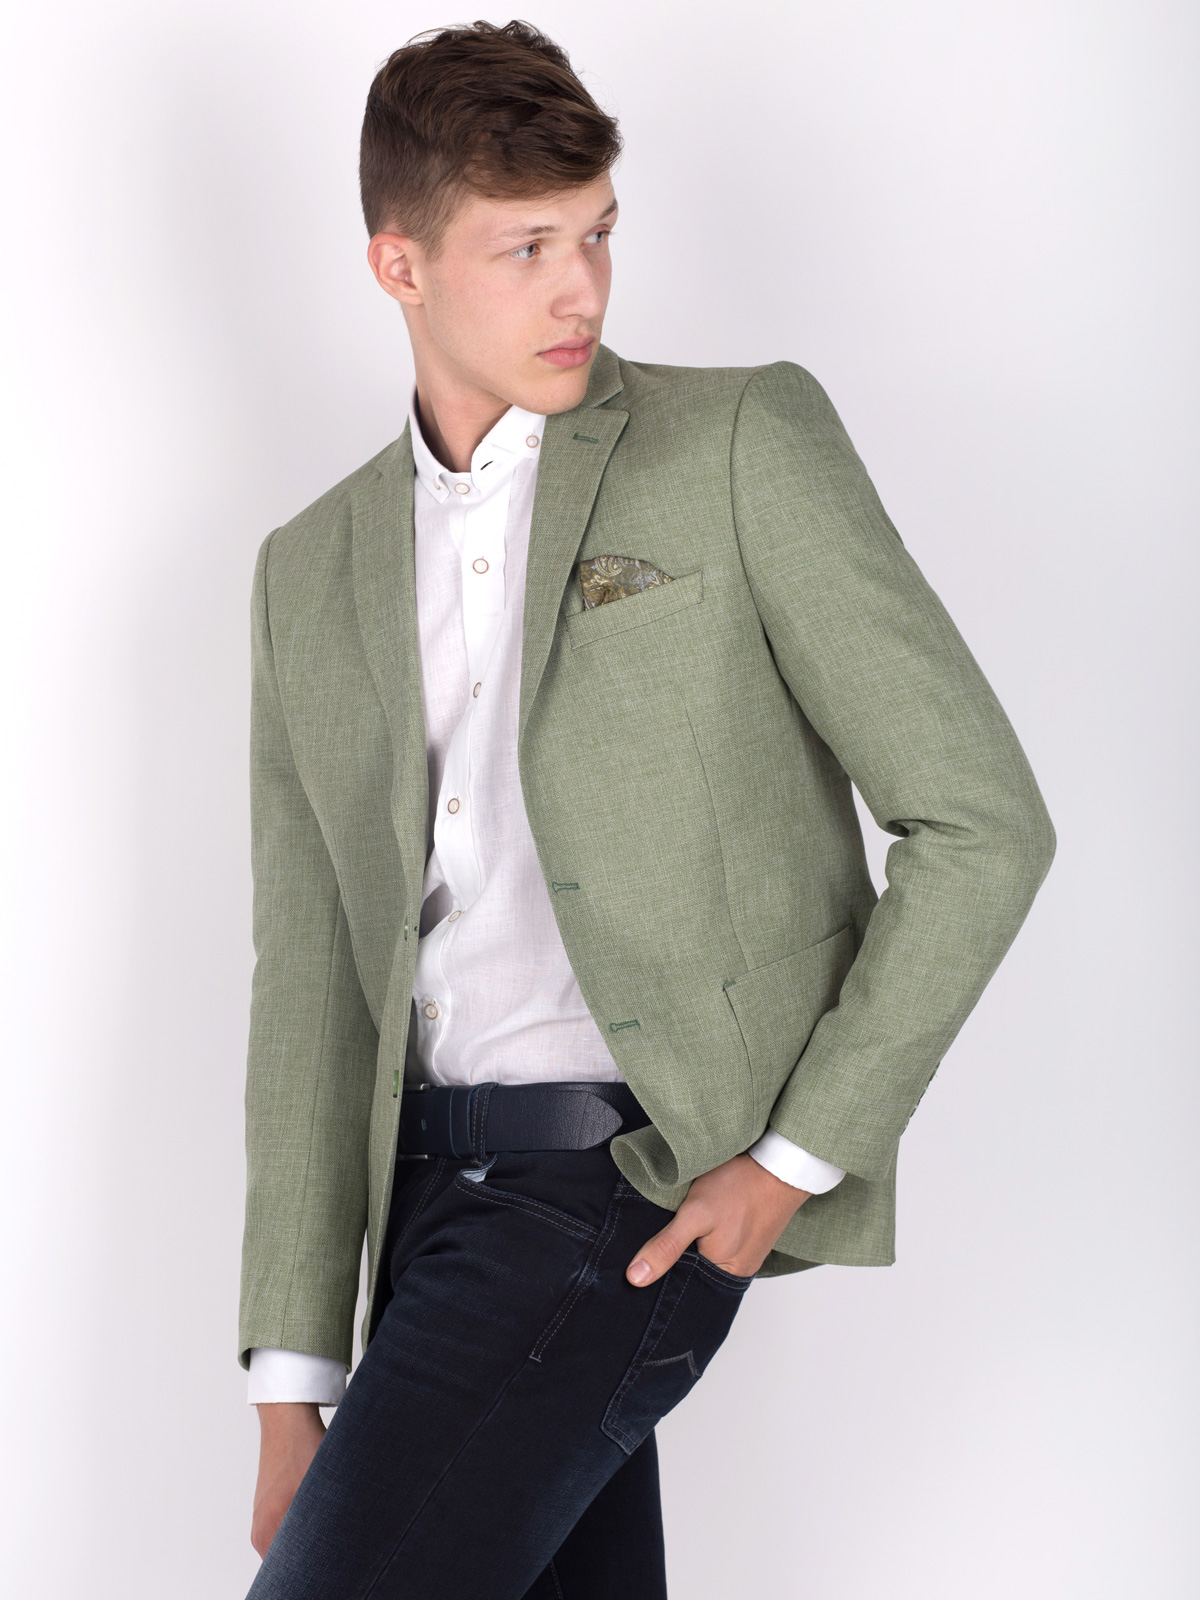 Green jacket made of linen and cotton - 64090 € 50.06 img2